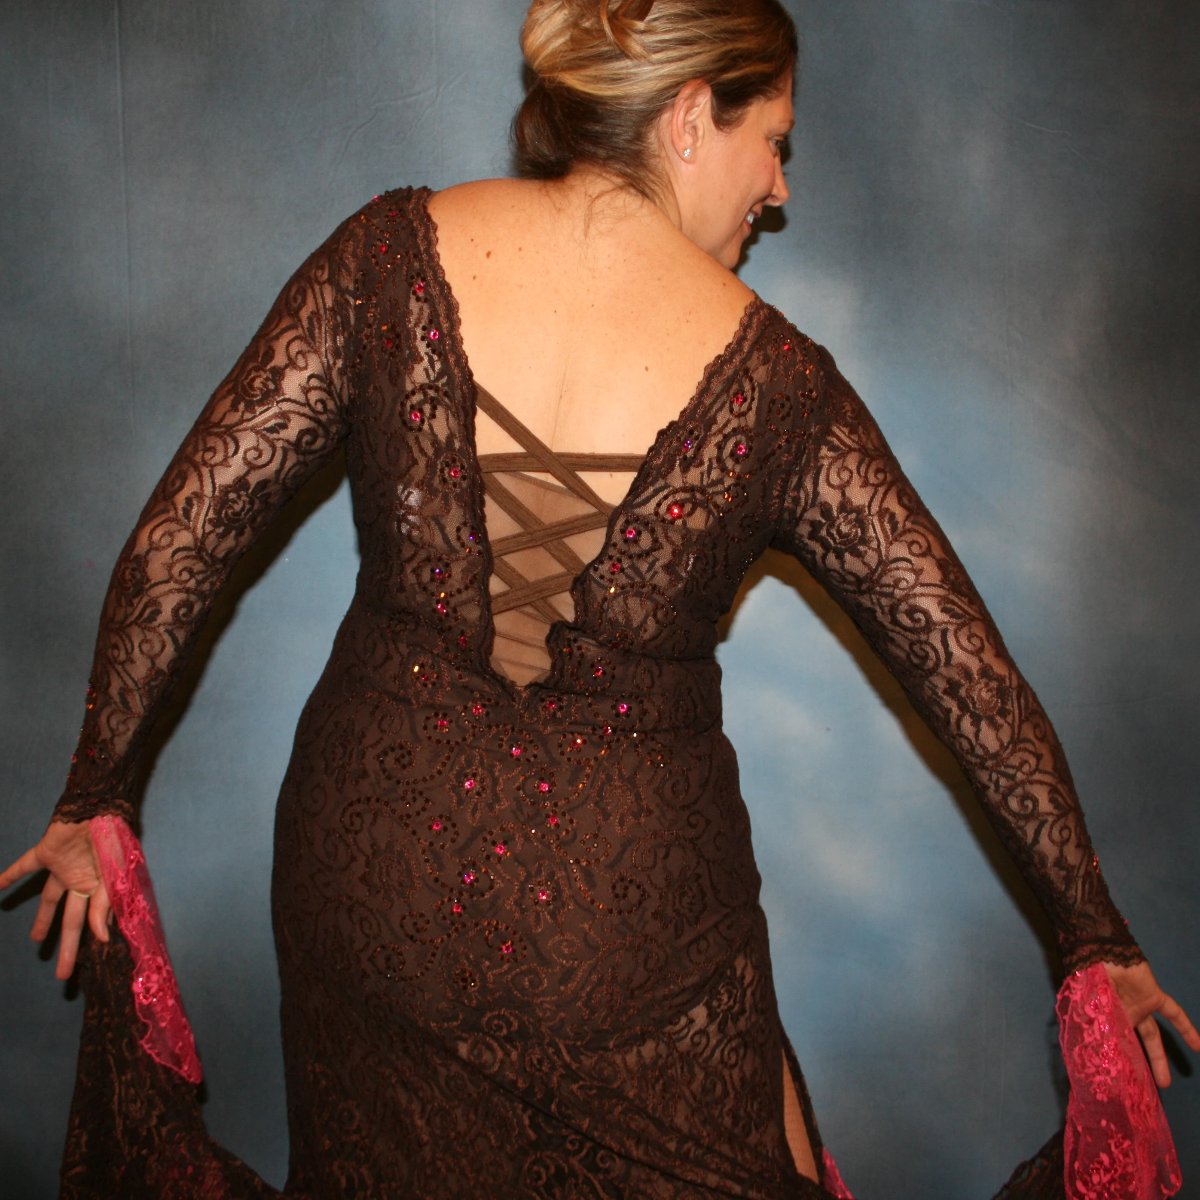 Crystal's Creations close up back view of Brown lace tango dress, fabulous bolero dress or rumba dress created in luxurious chocolate brown stretch lace with accent flounces of a deep pink glitter lace, embellished with Swarovski rhinestone detail work in copper & fuschia. 